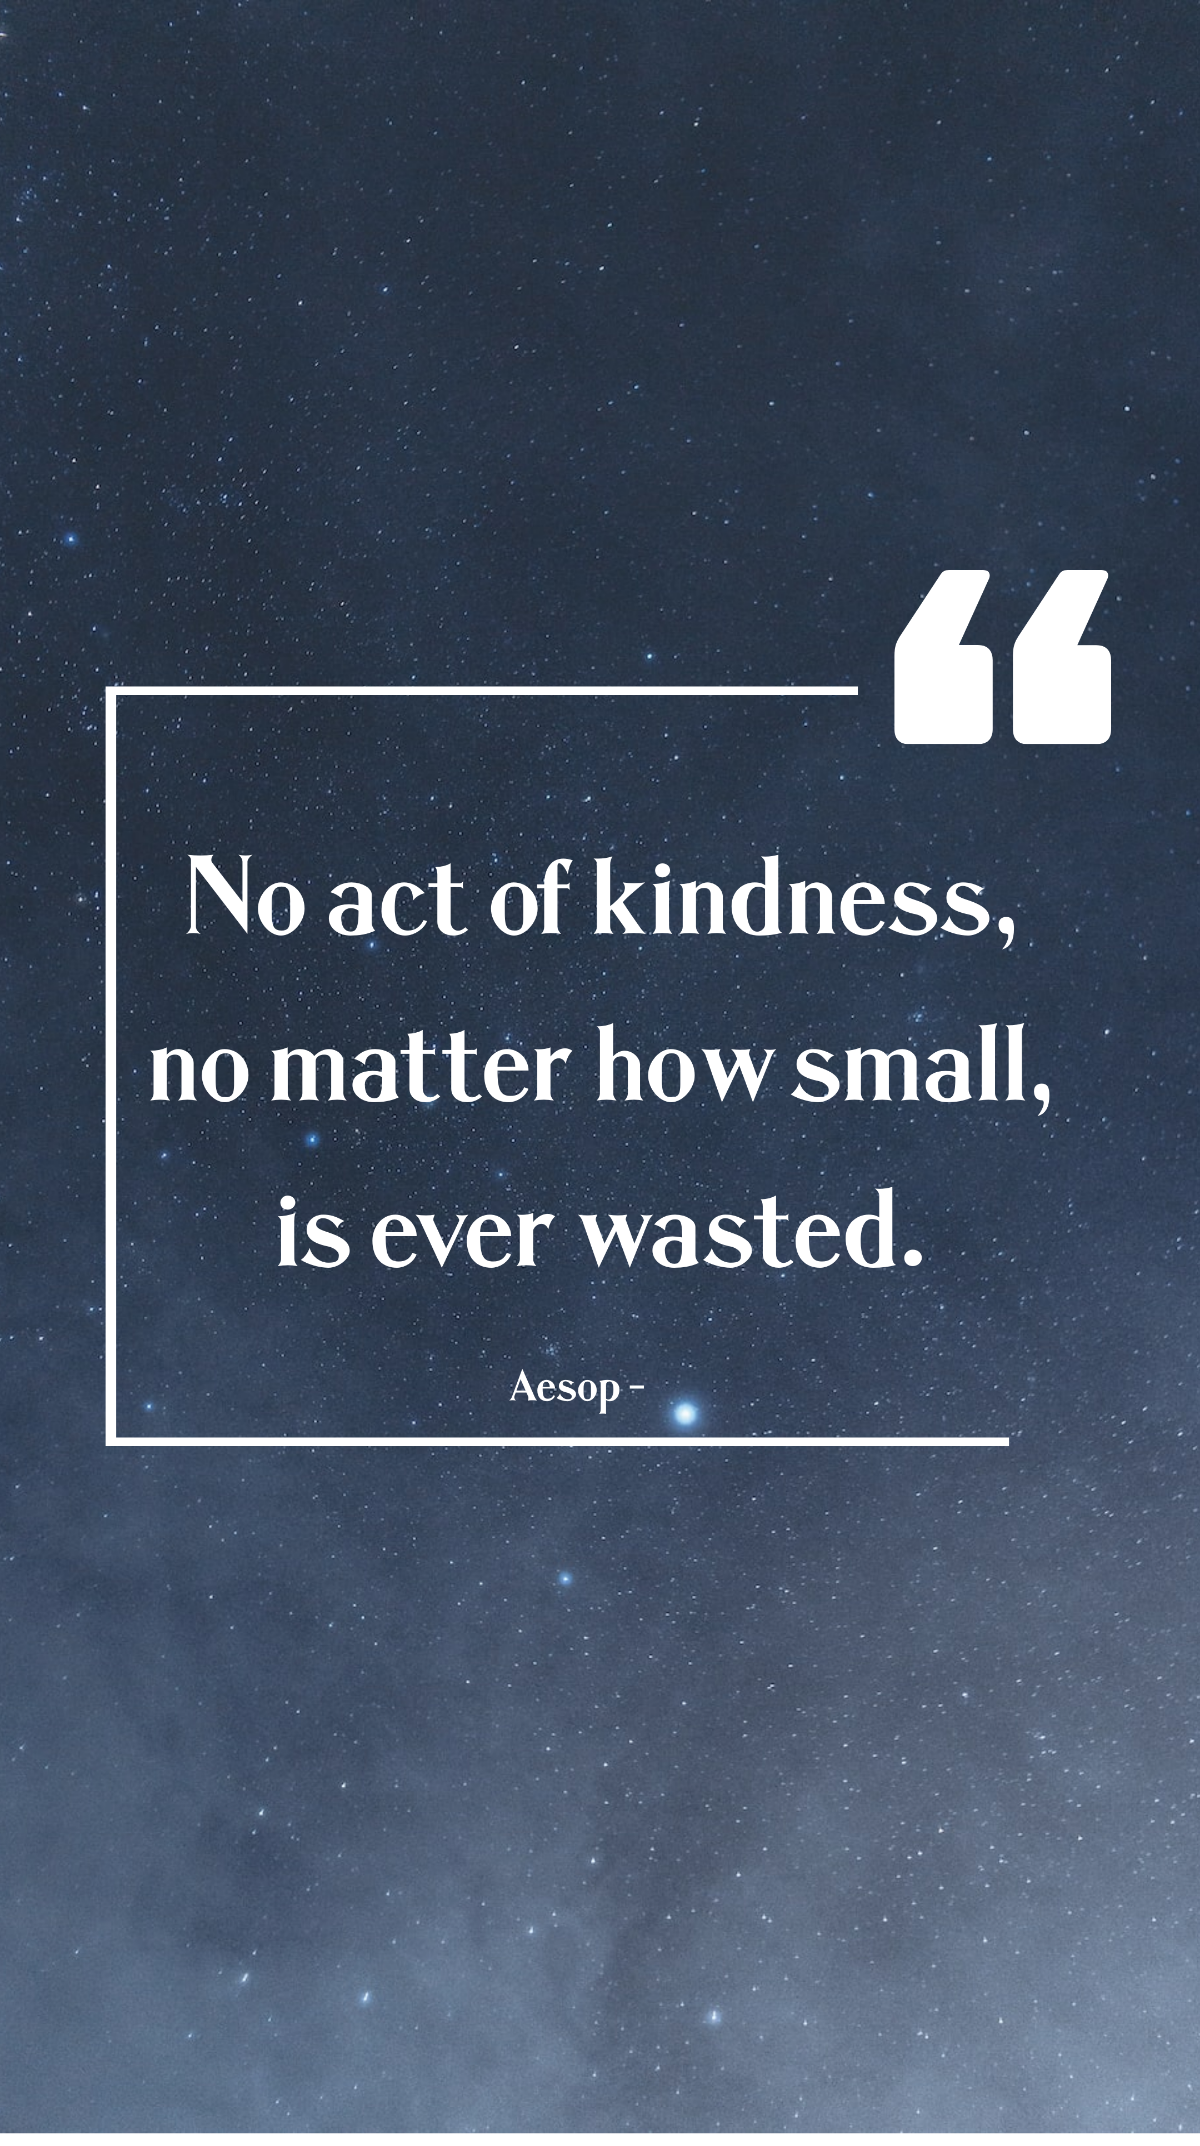 Aesop - No act of kindness, no matter how small, is ever wasted. Template